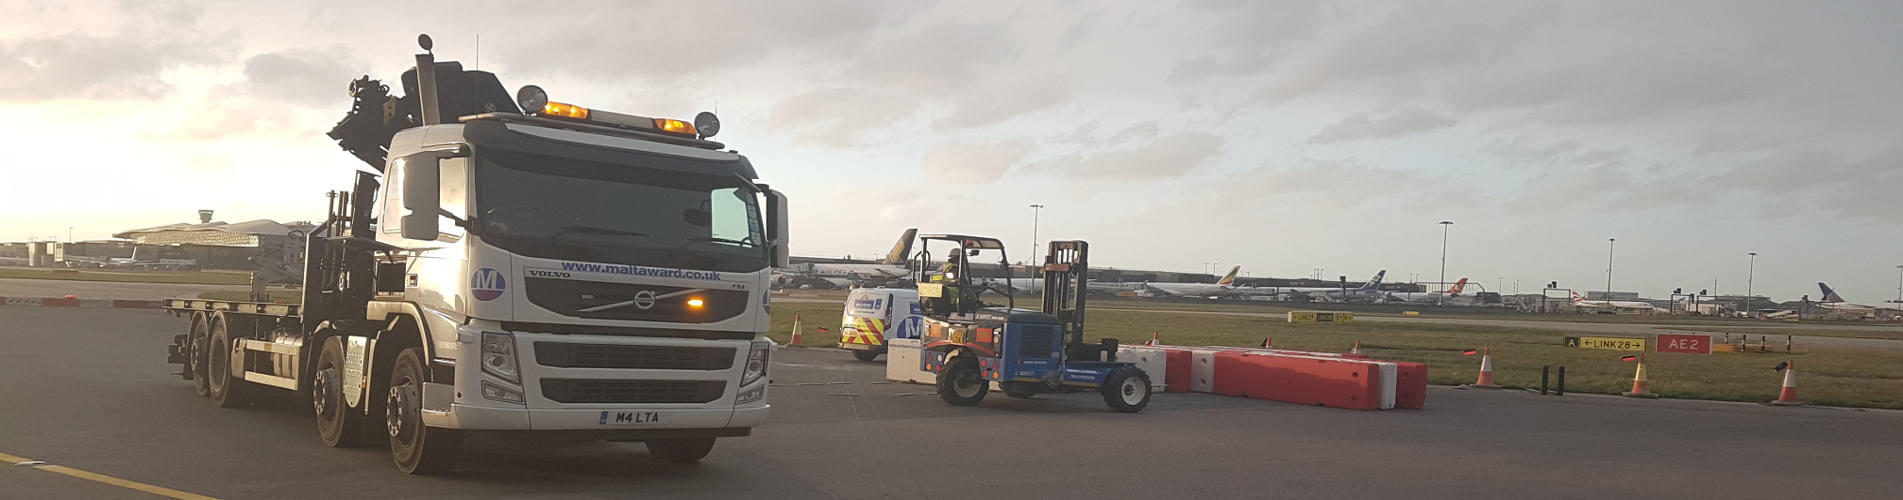 Airside Services from Maltaward